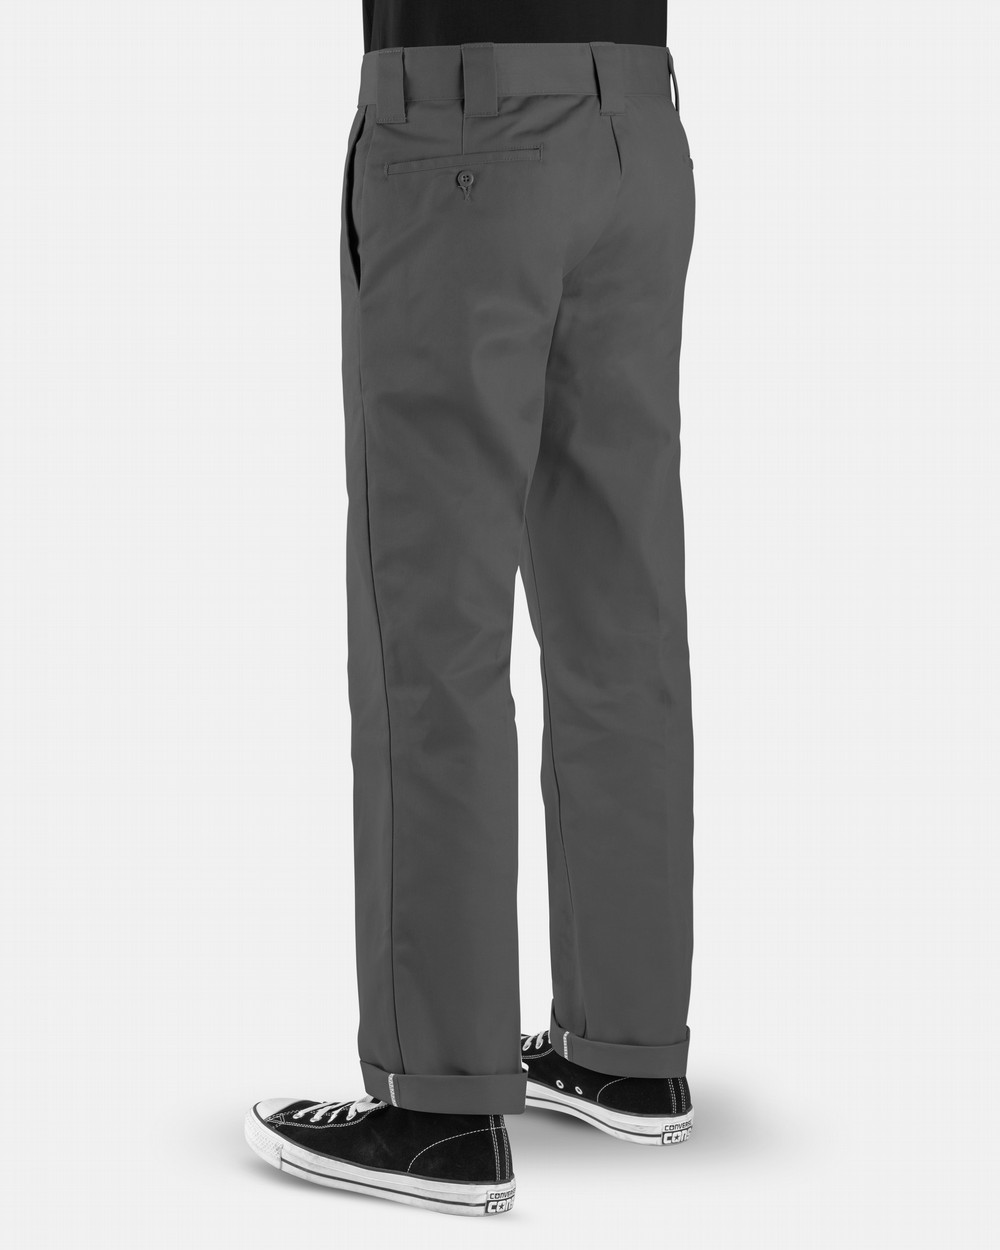 Dickies Mens Relaxed Fit MidRise Straight Leg Cargo Work Pants at Tractor  Supply Co